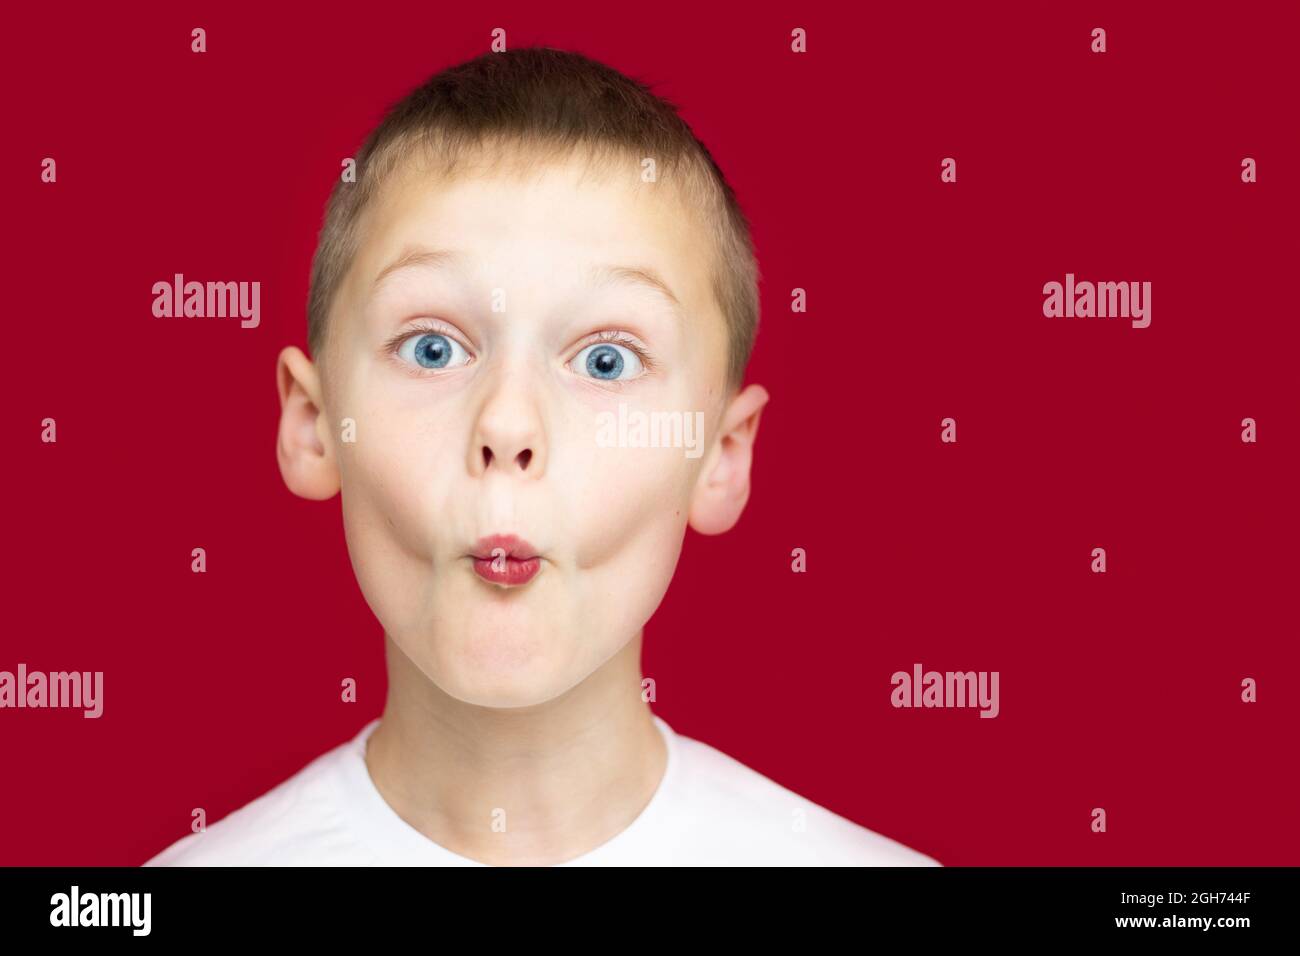 Boy teenager 7-10 in a white t-shirt makes faces, depicting a kiss, with wide open eyes on a red background Stock Photo